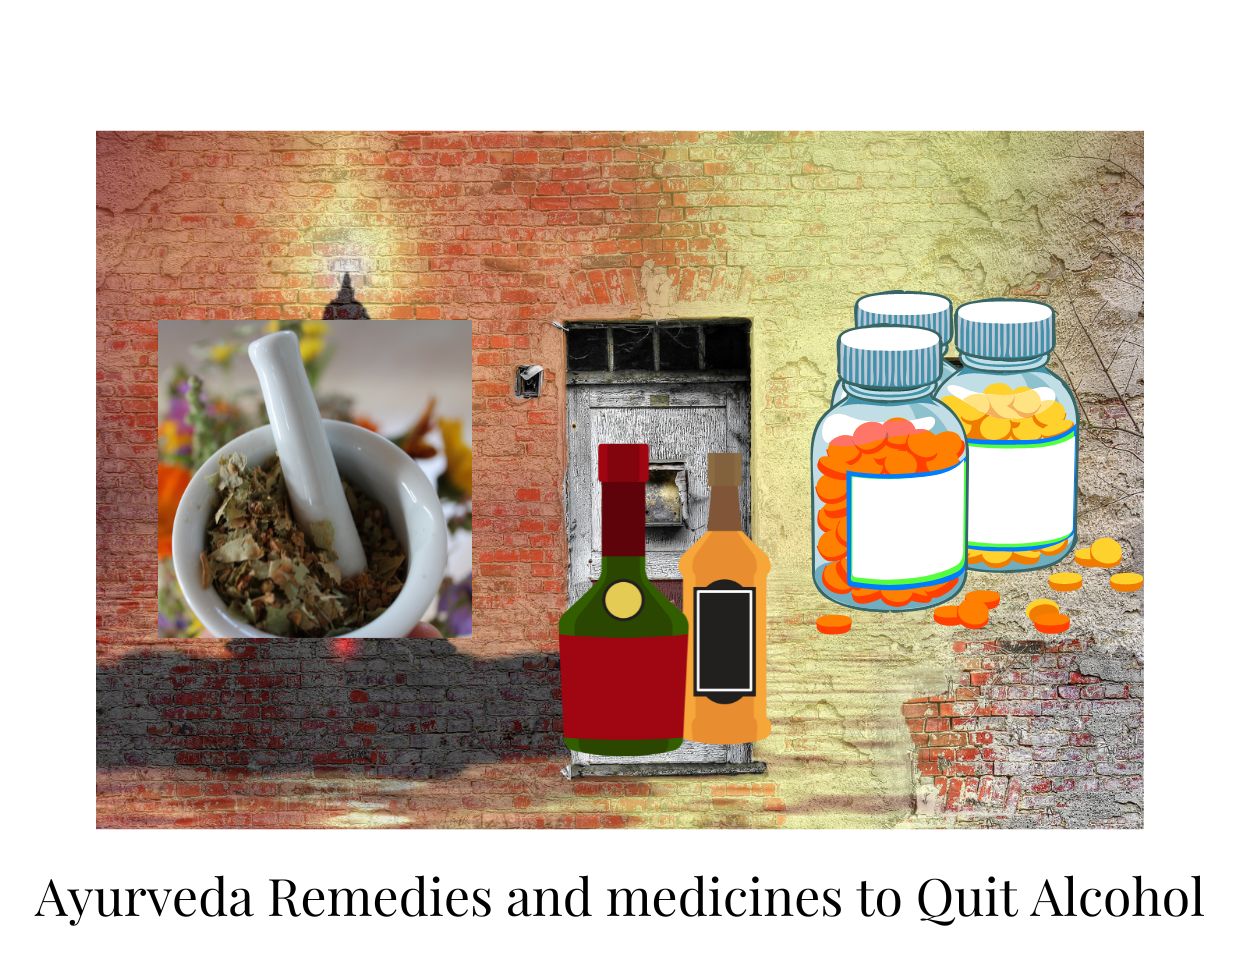 Ayurveda-Remedies-and-medicines-Quit-Alcohol